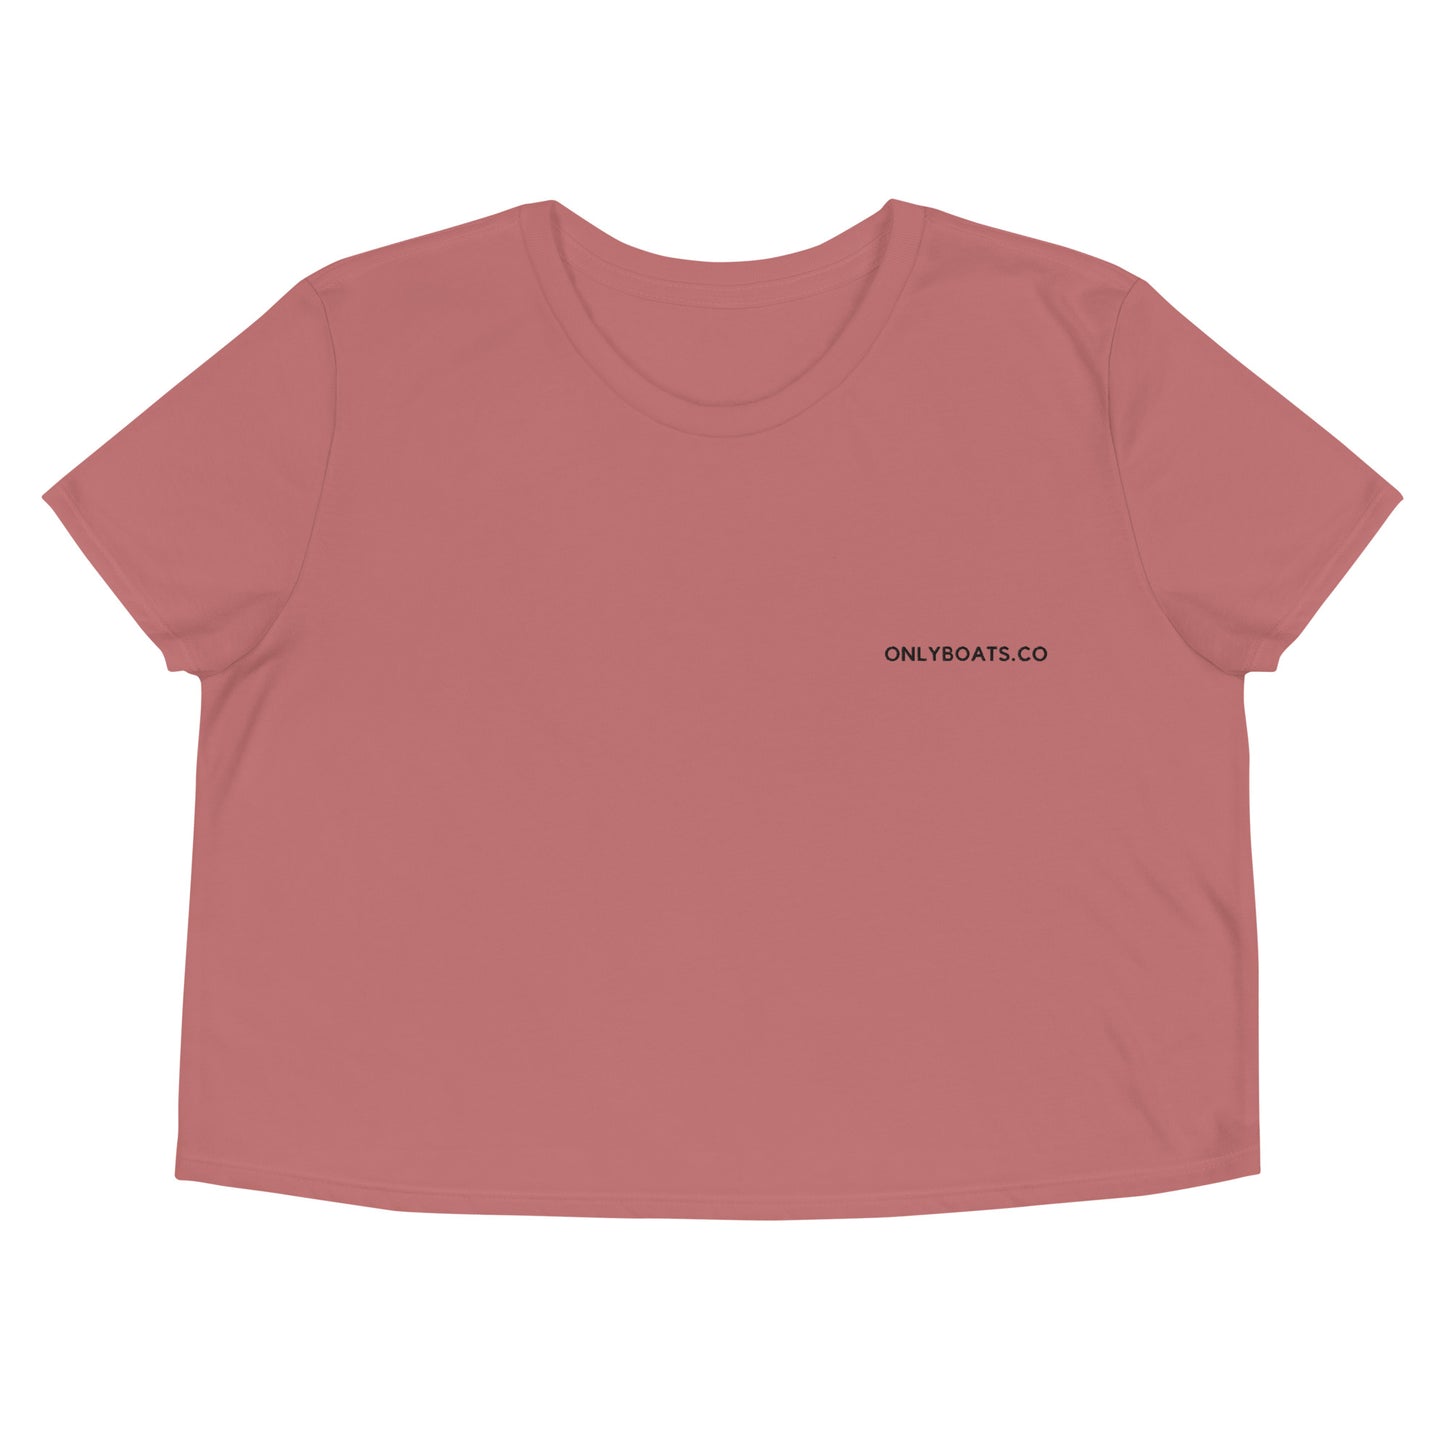 Onlyboats.co Crop Tee - ONLY BOATS